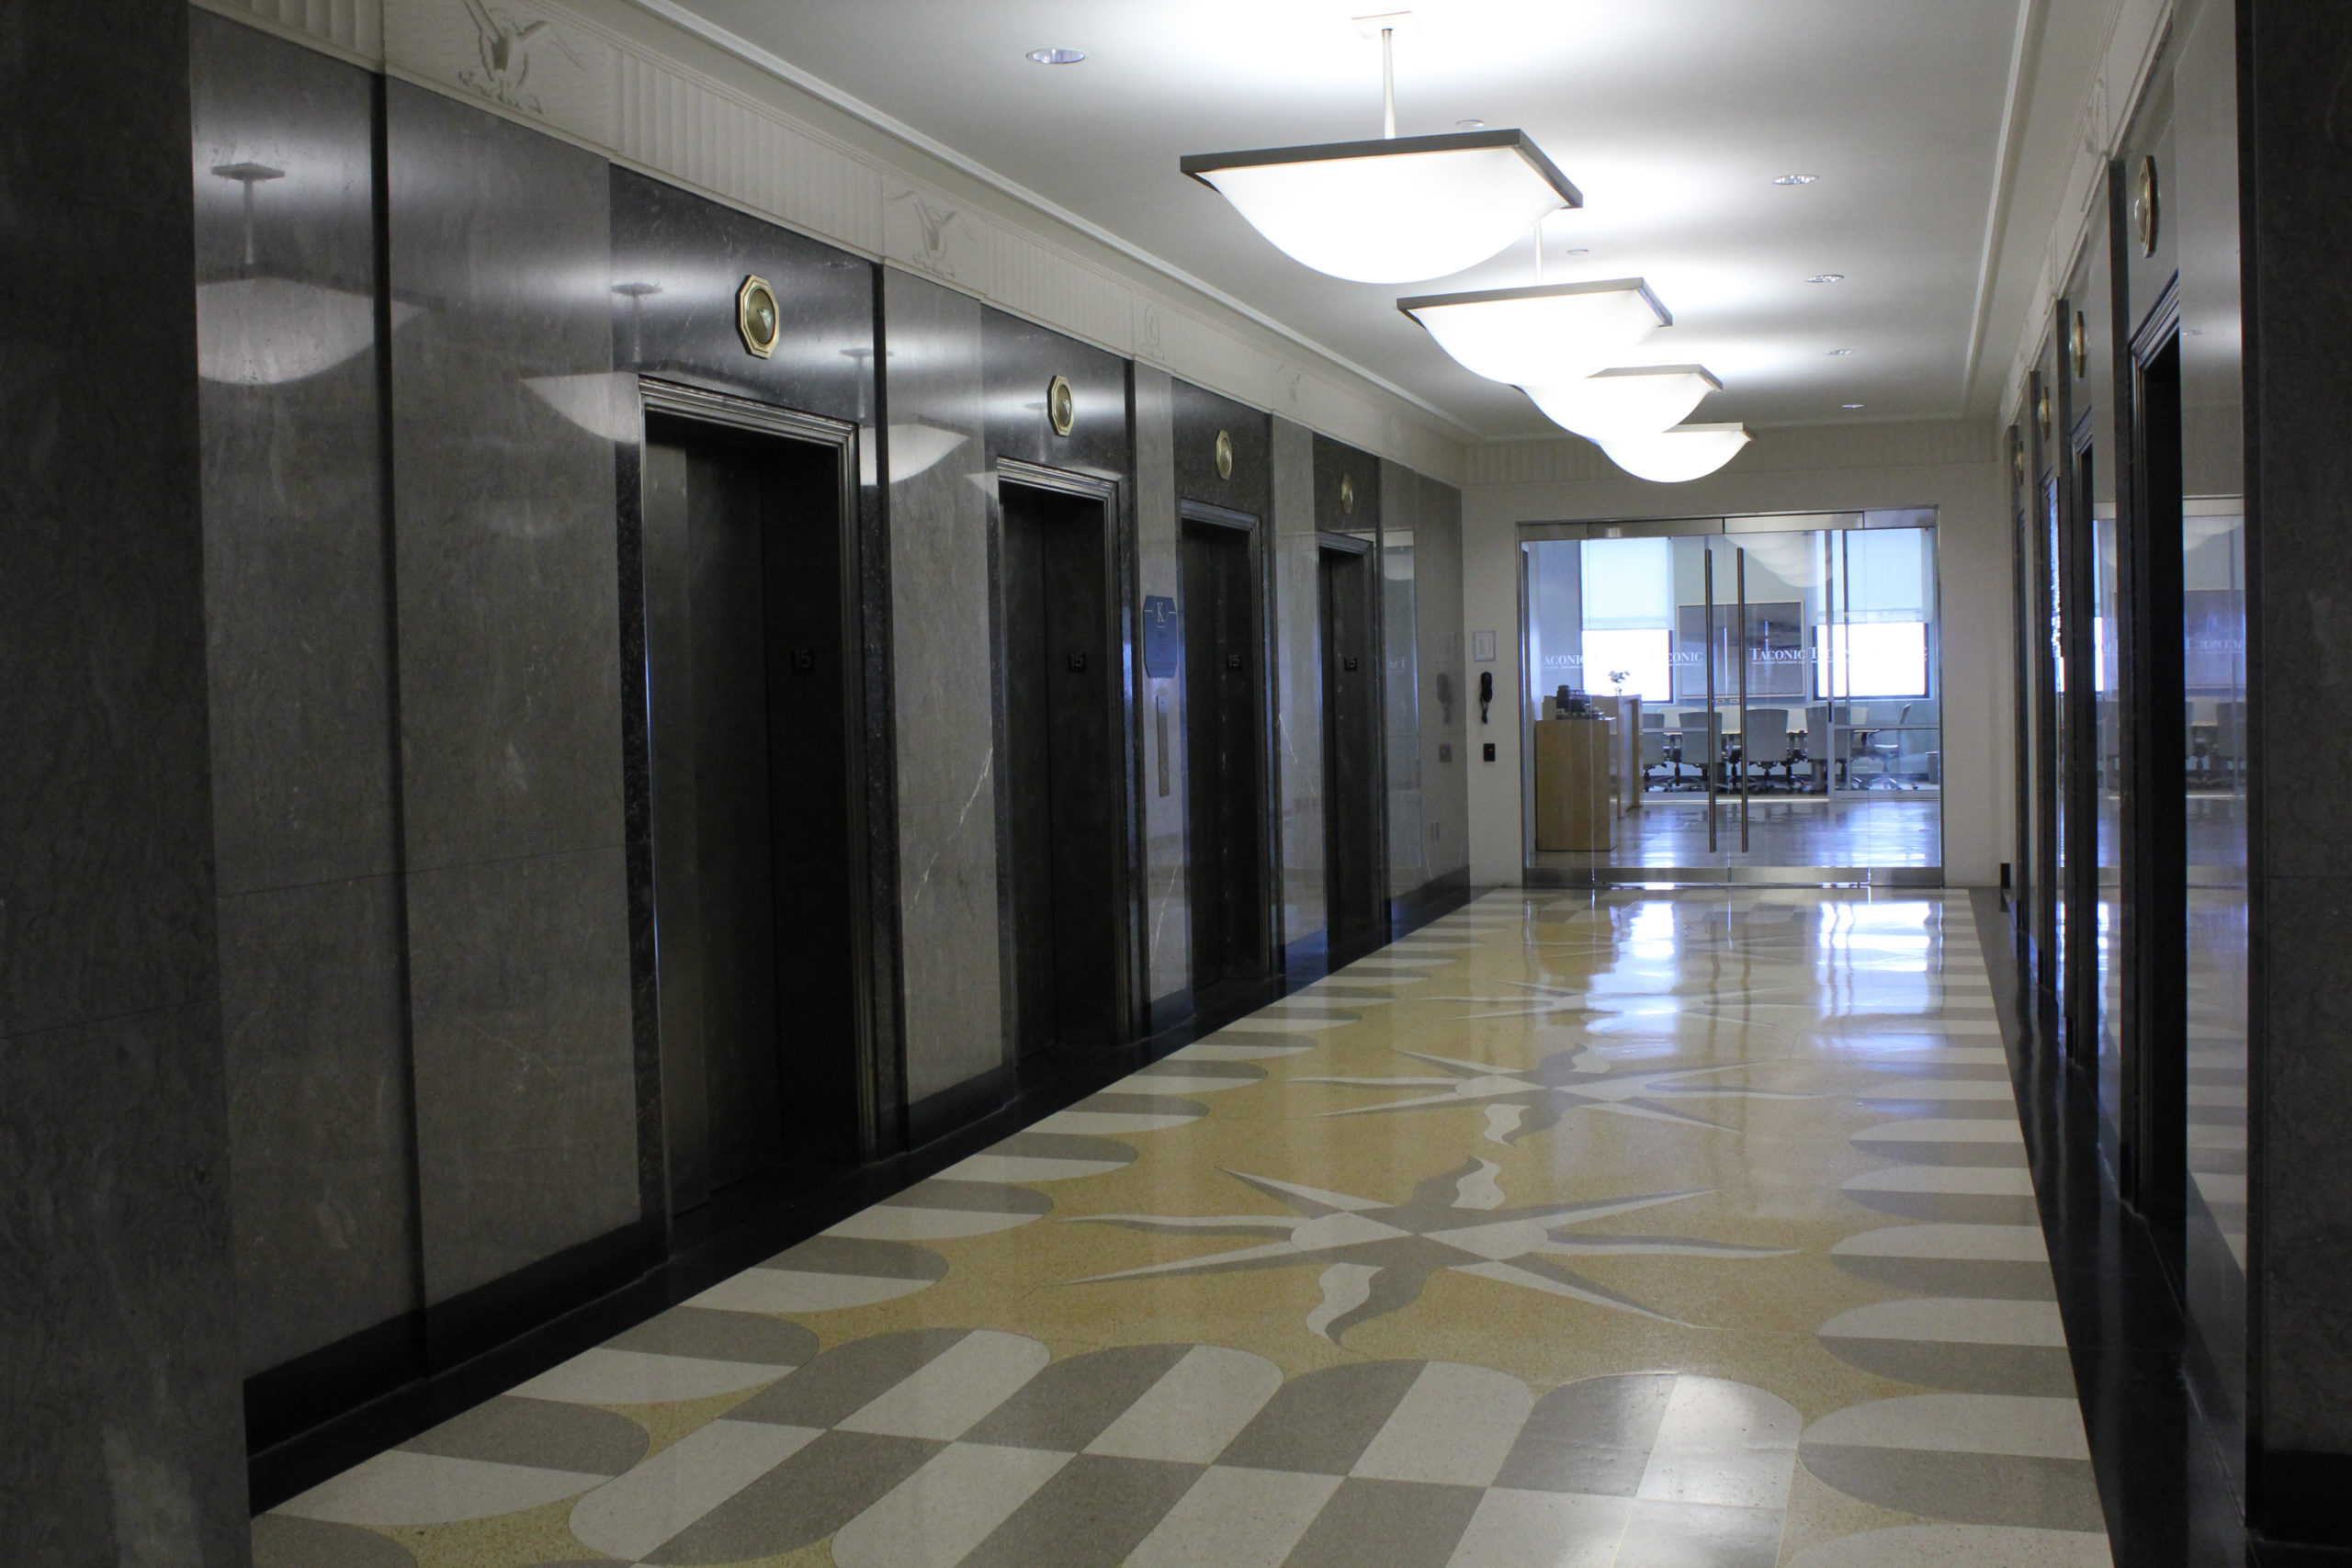 Talisen Construction Corporation: Construction Management and General Contractor. Taconic Management, 111 Eighth Avenue, New York. Custom designed white, gray, and green stone tile with four stone elevator banks work environment